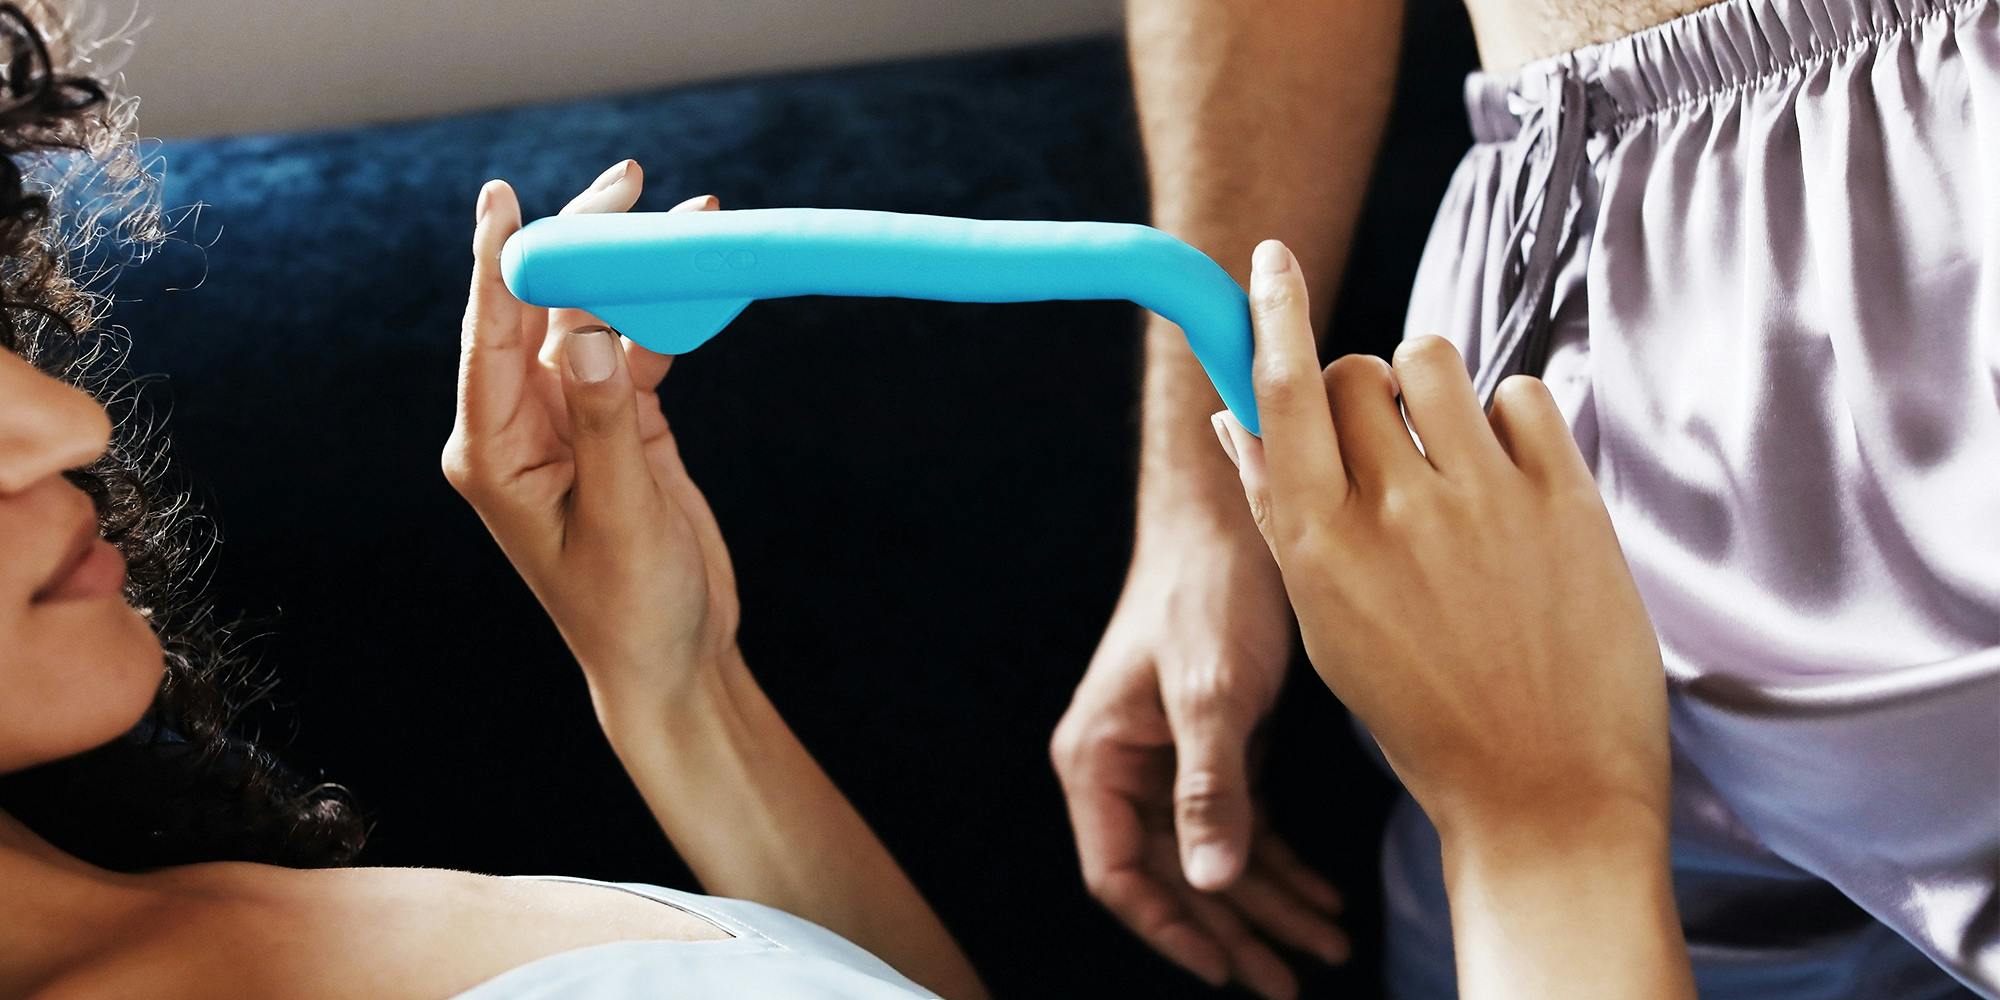 Discover erogenous zones you didn’t know existed with this vibrator